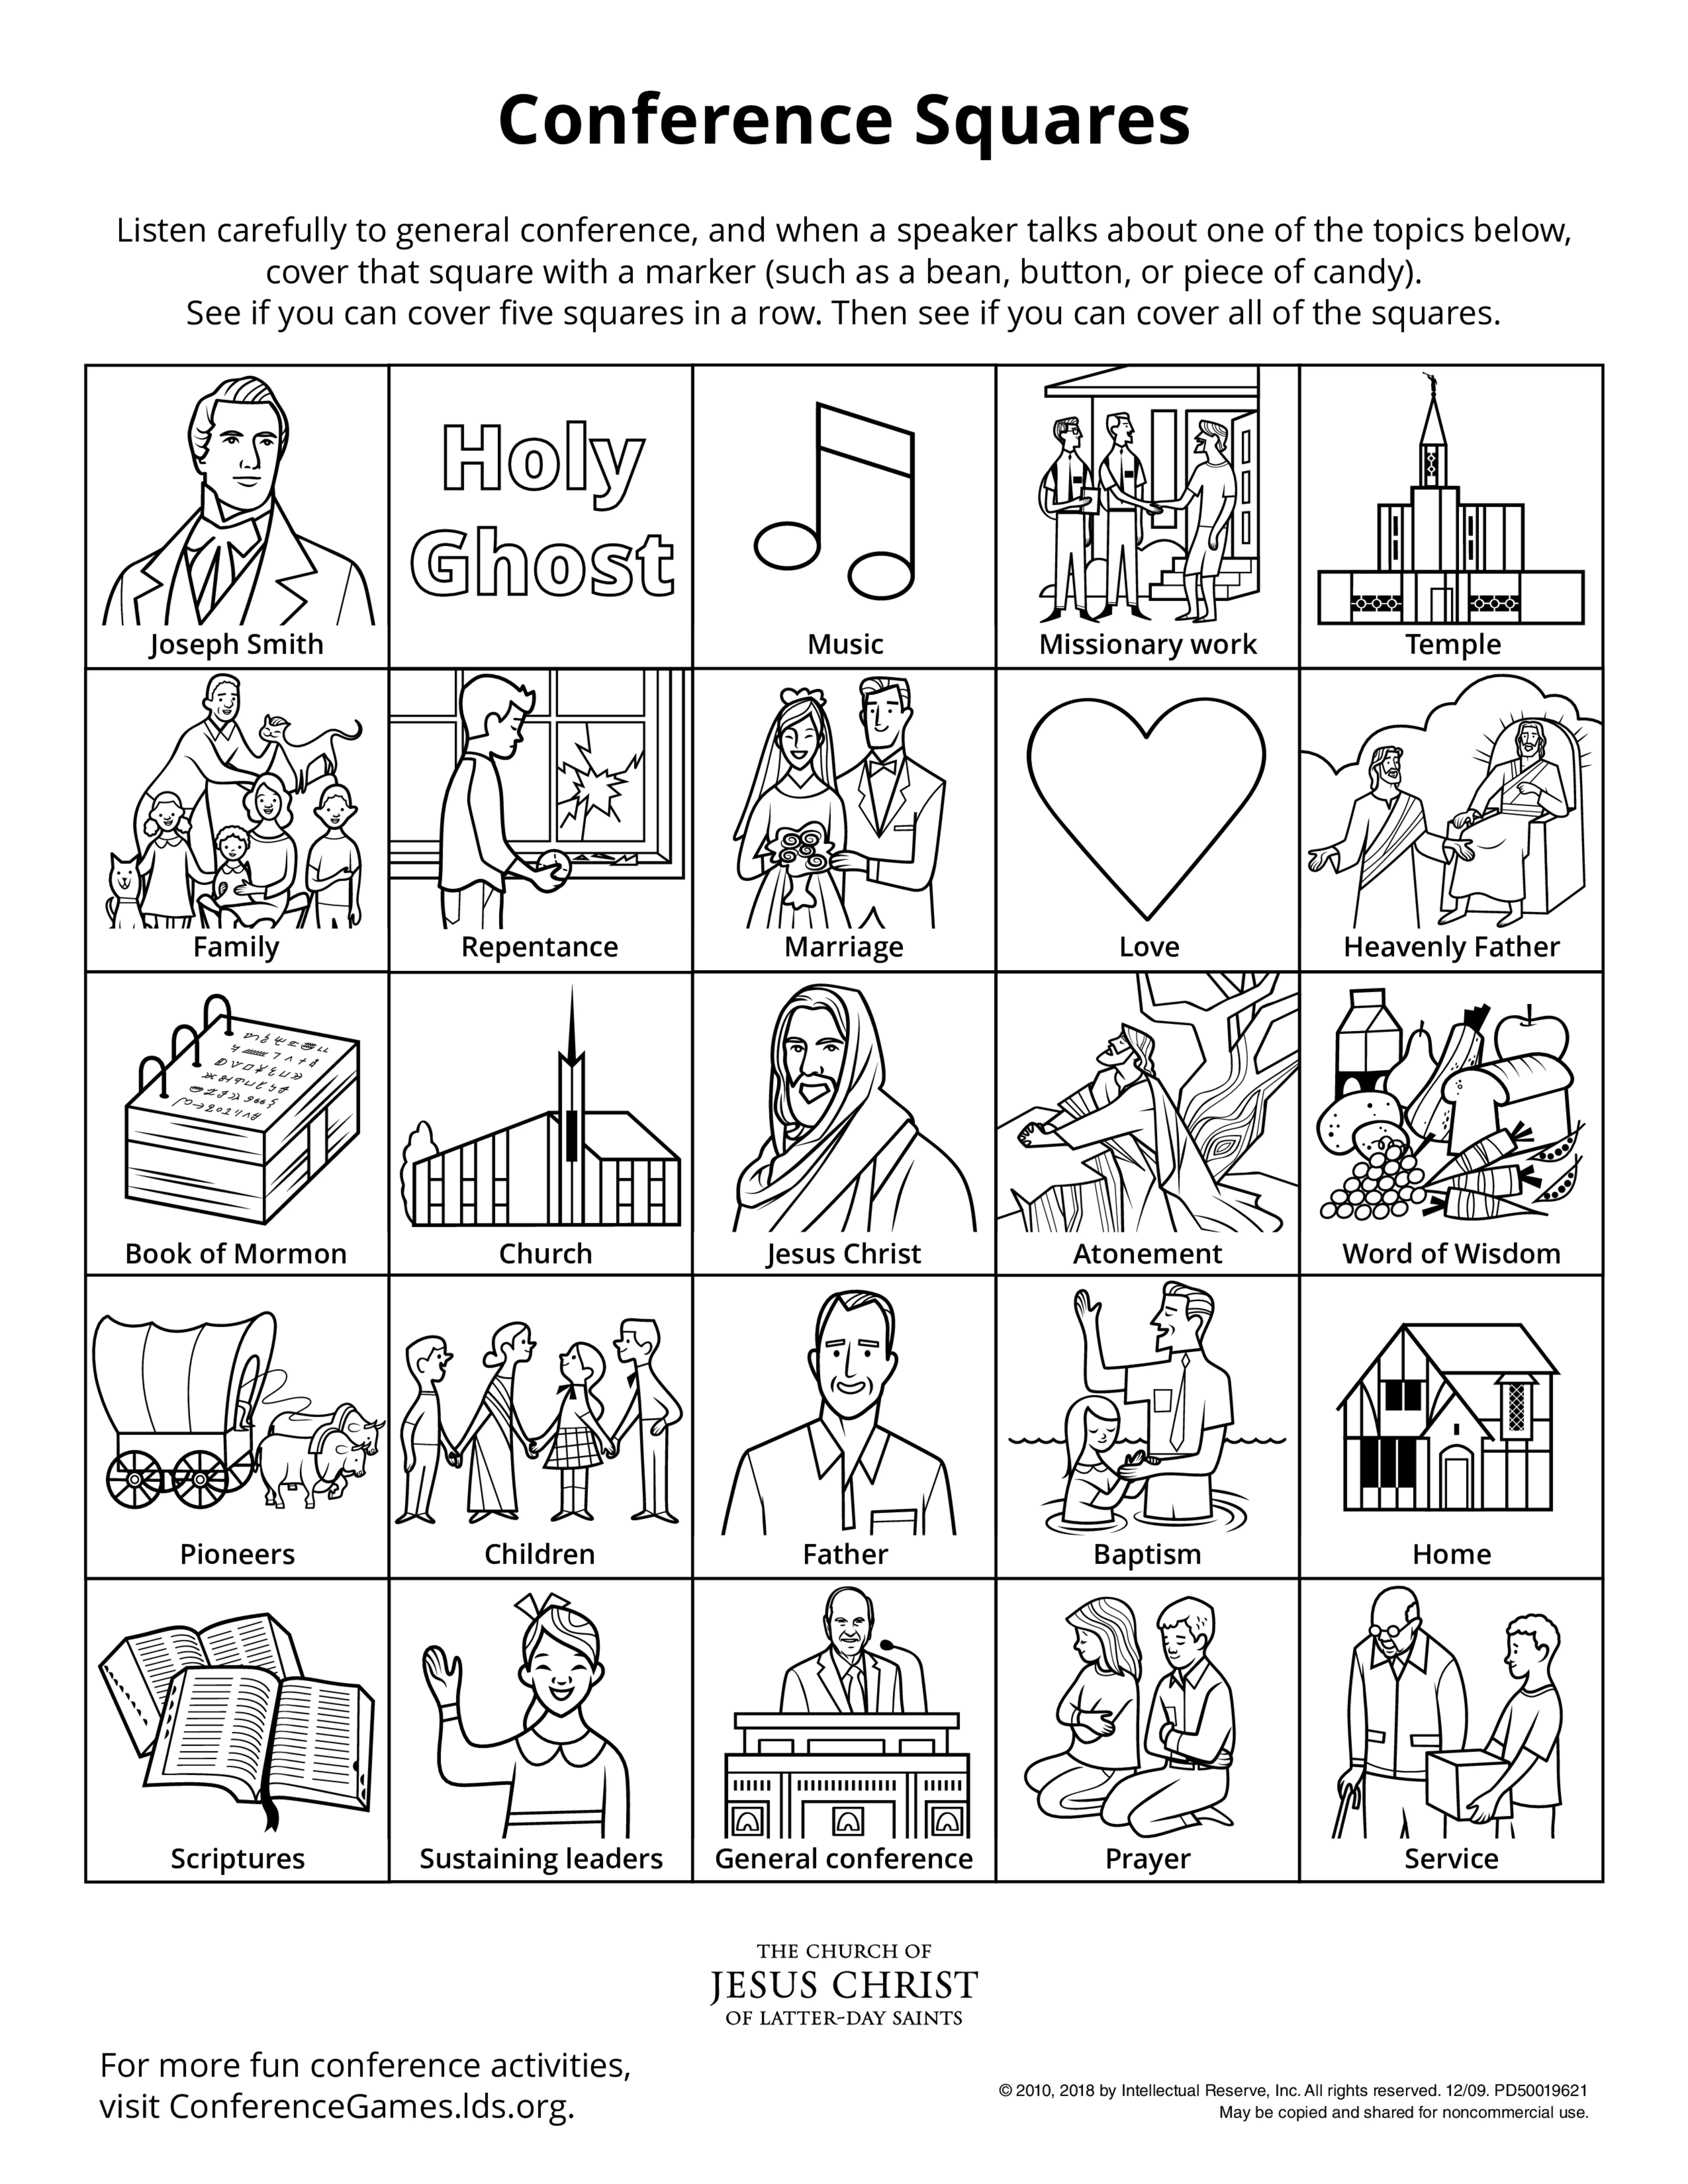 An activity page to encourage children to listen and engage while watching general conference.